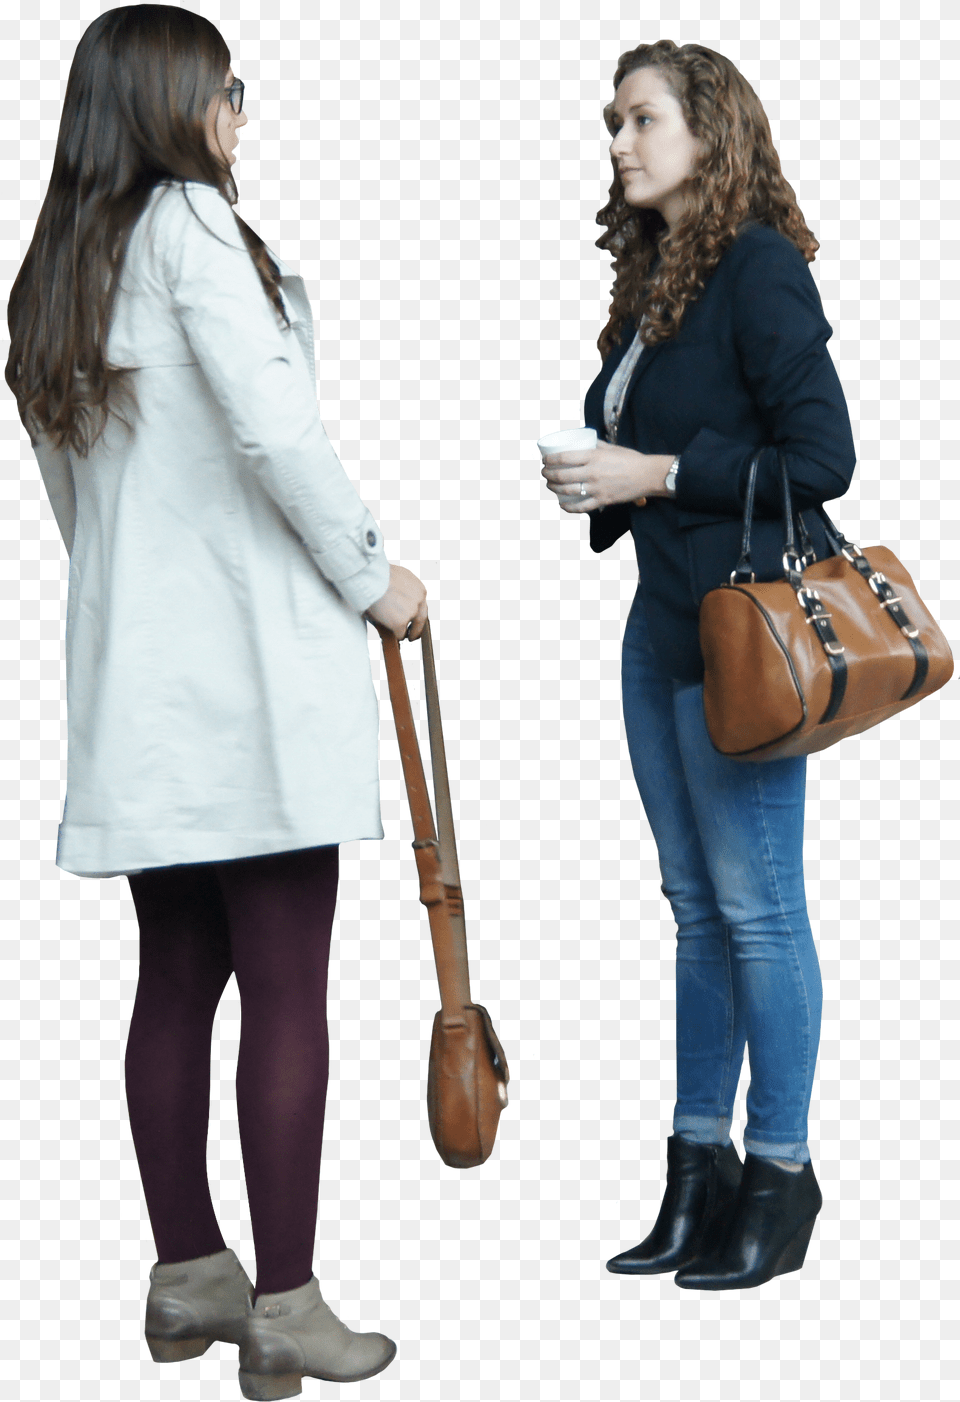 People Images For Photoshop People, Accessories, Handbag, Purse, Sleeve Png